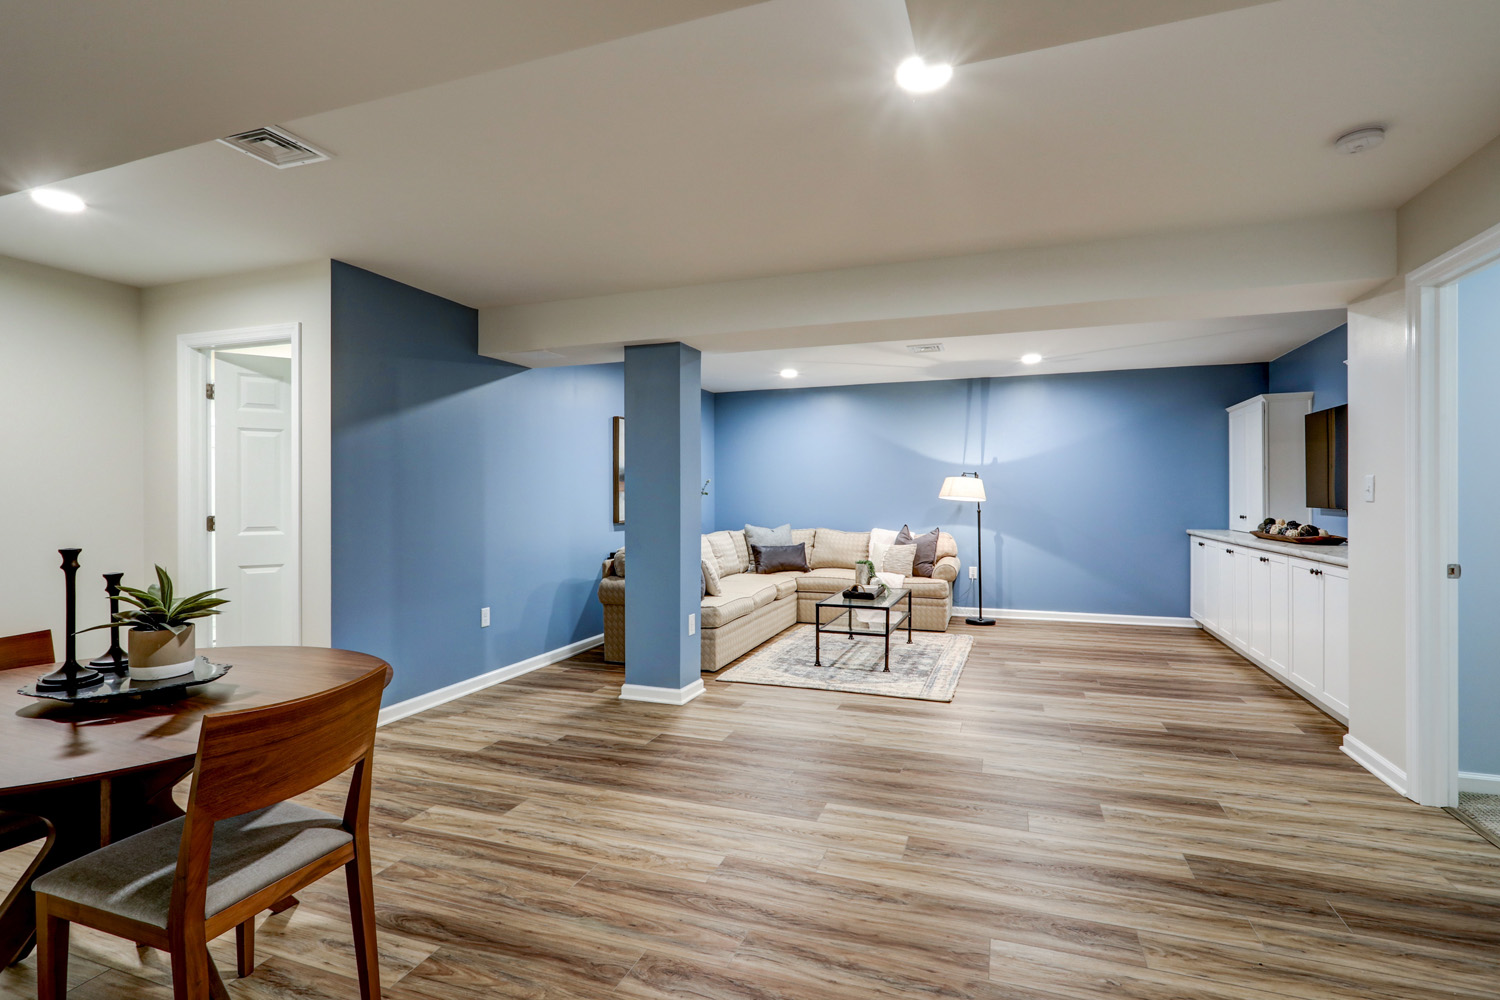 Manheim Basement Remodel with living room and lvp floors